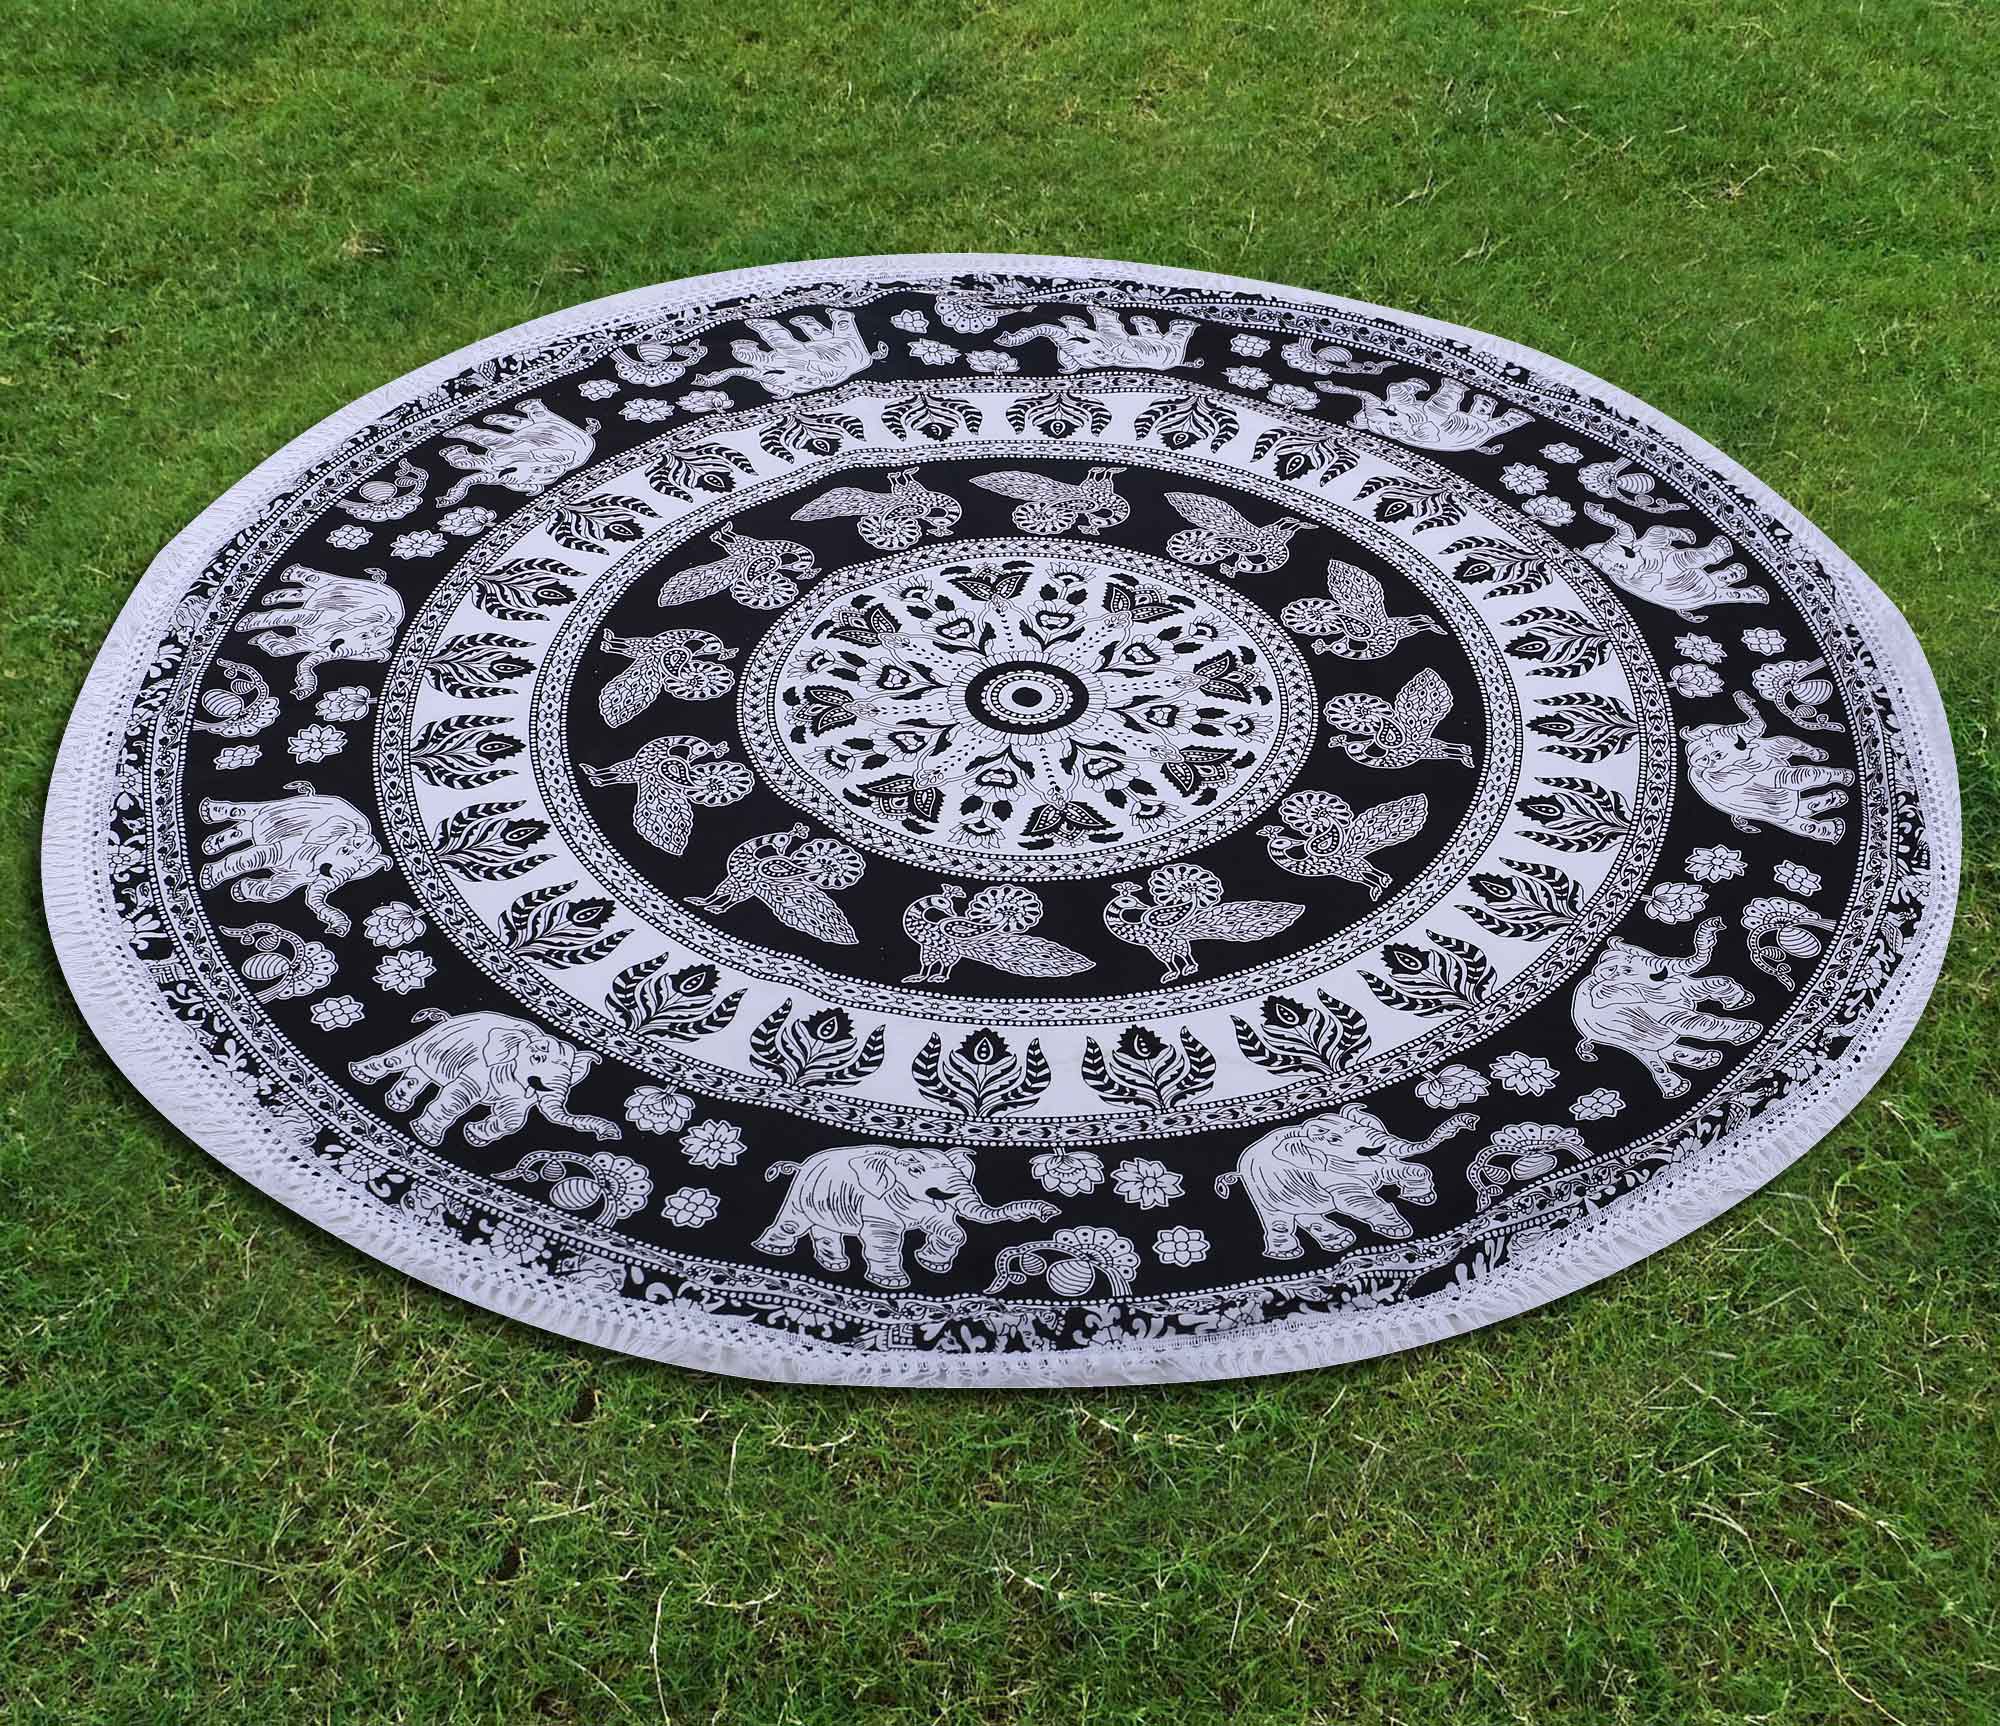 Black Wall Hanging Round Roundies Beach Throw Cotton Yoga Mat Table Cloths Table Cover Picnic Mat Tapestry Picnic Blanket Mat 72